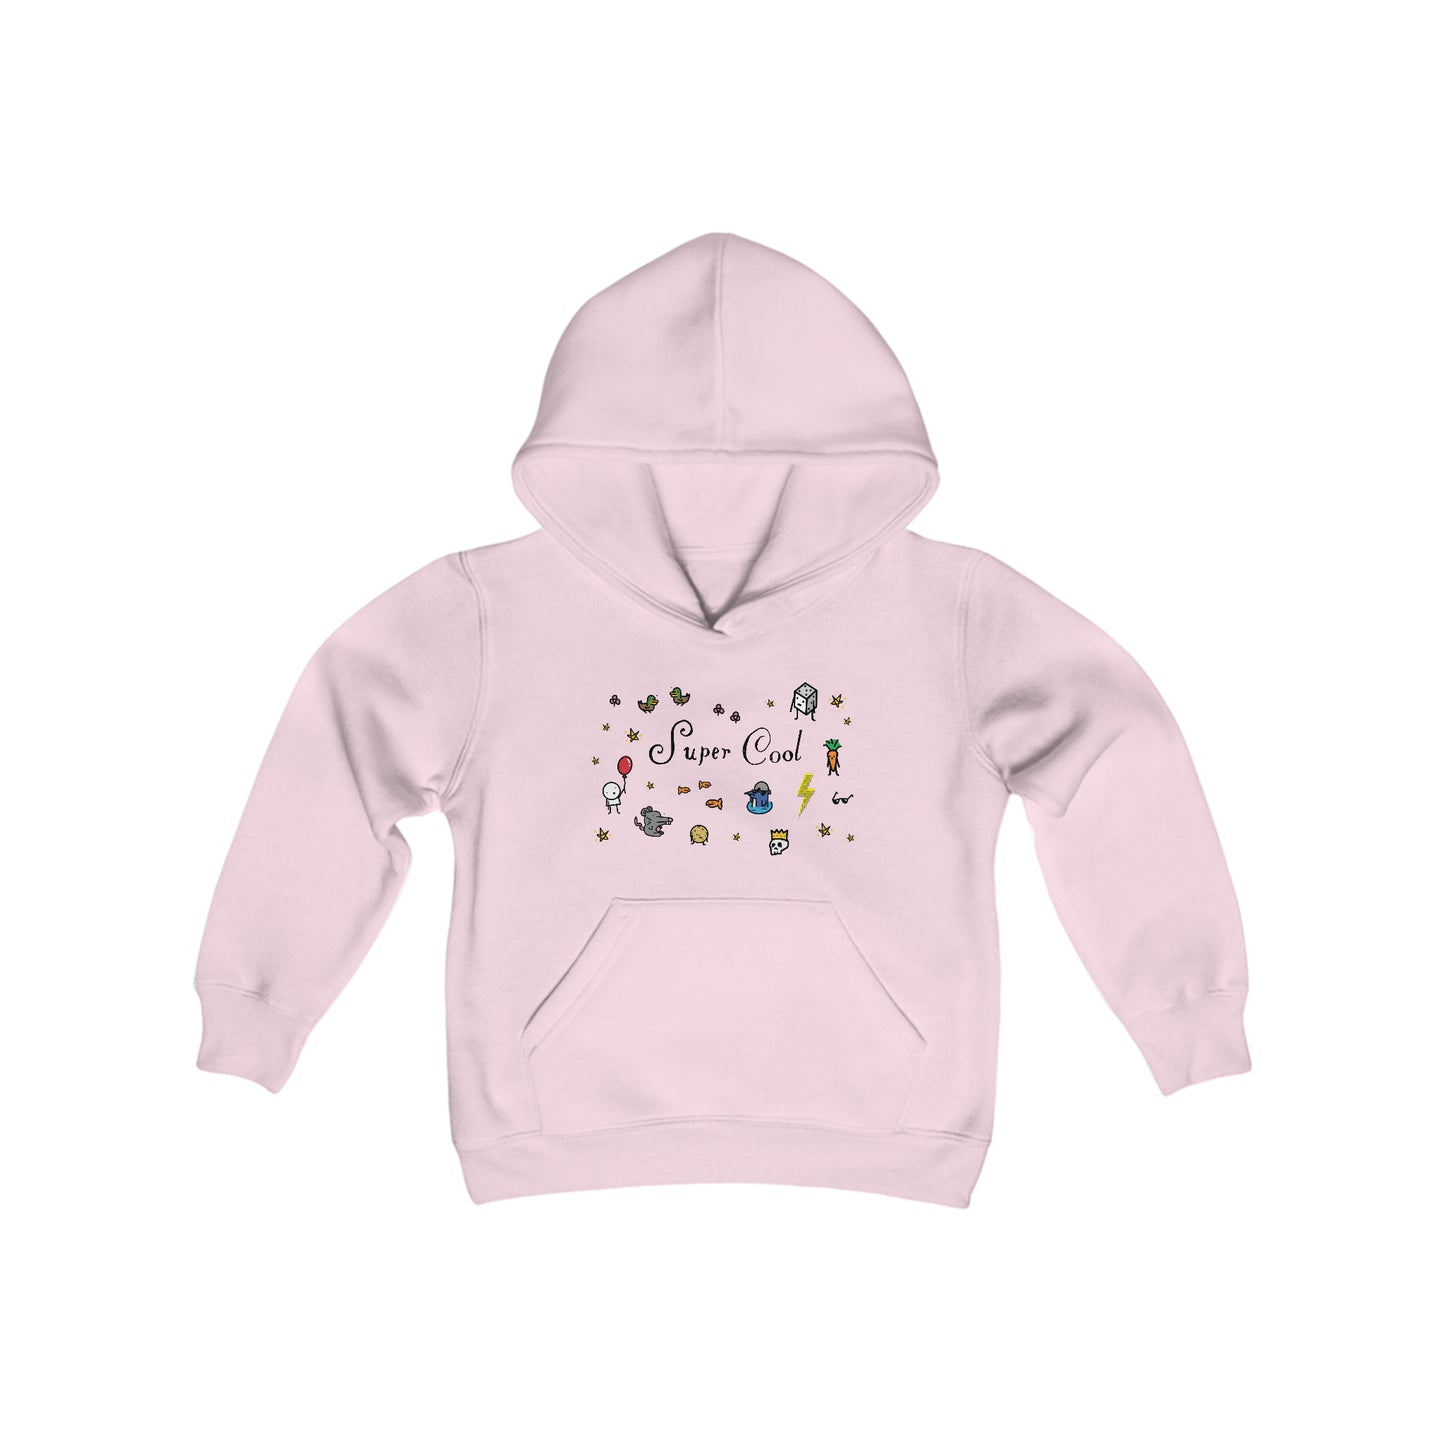 "Super Cool" Collage - Youth Heavy Blend Hooded Sweatshirt